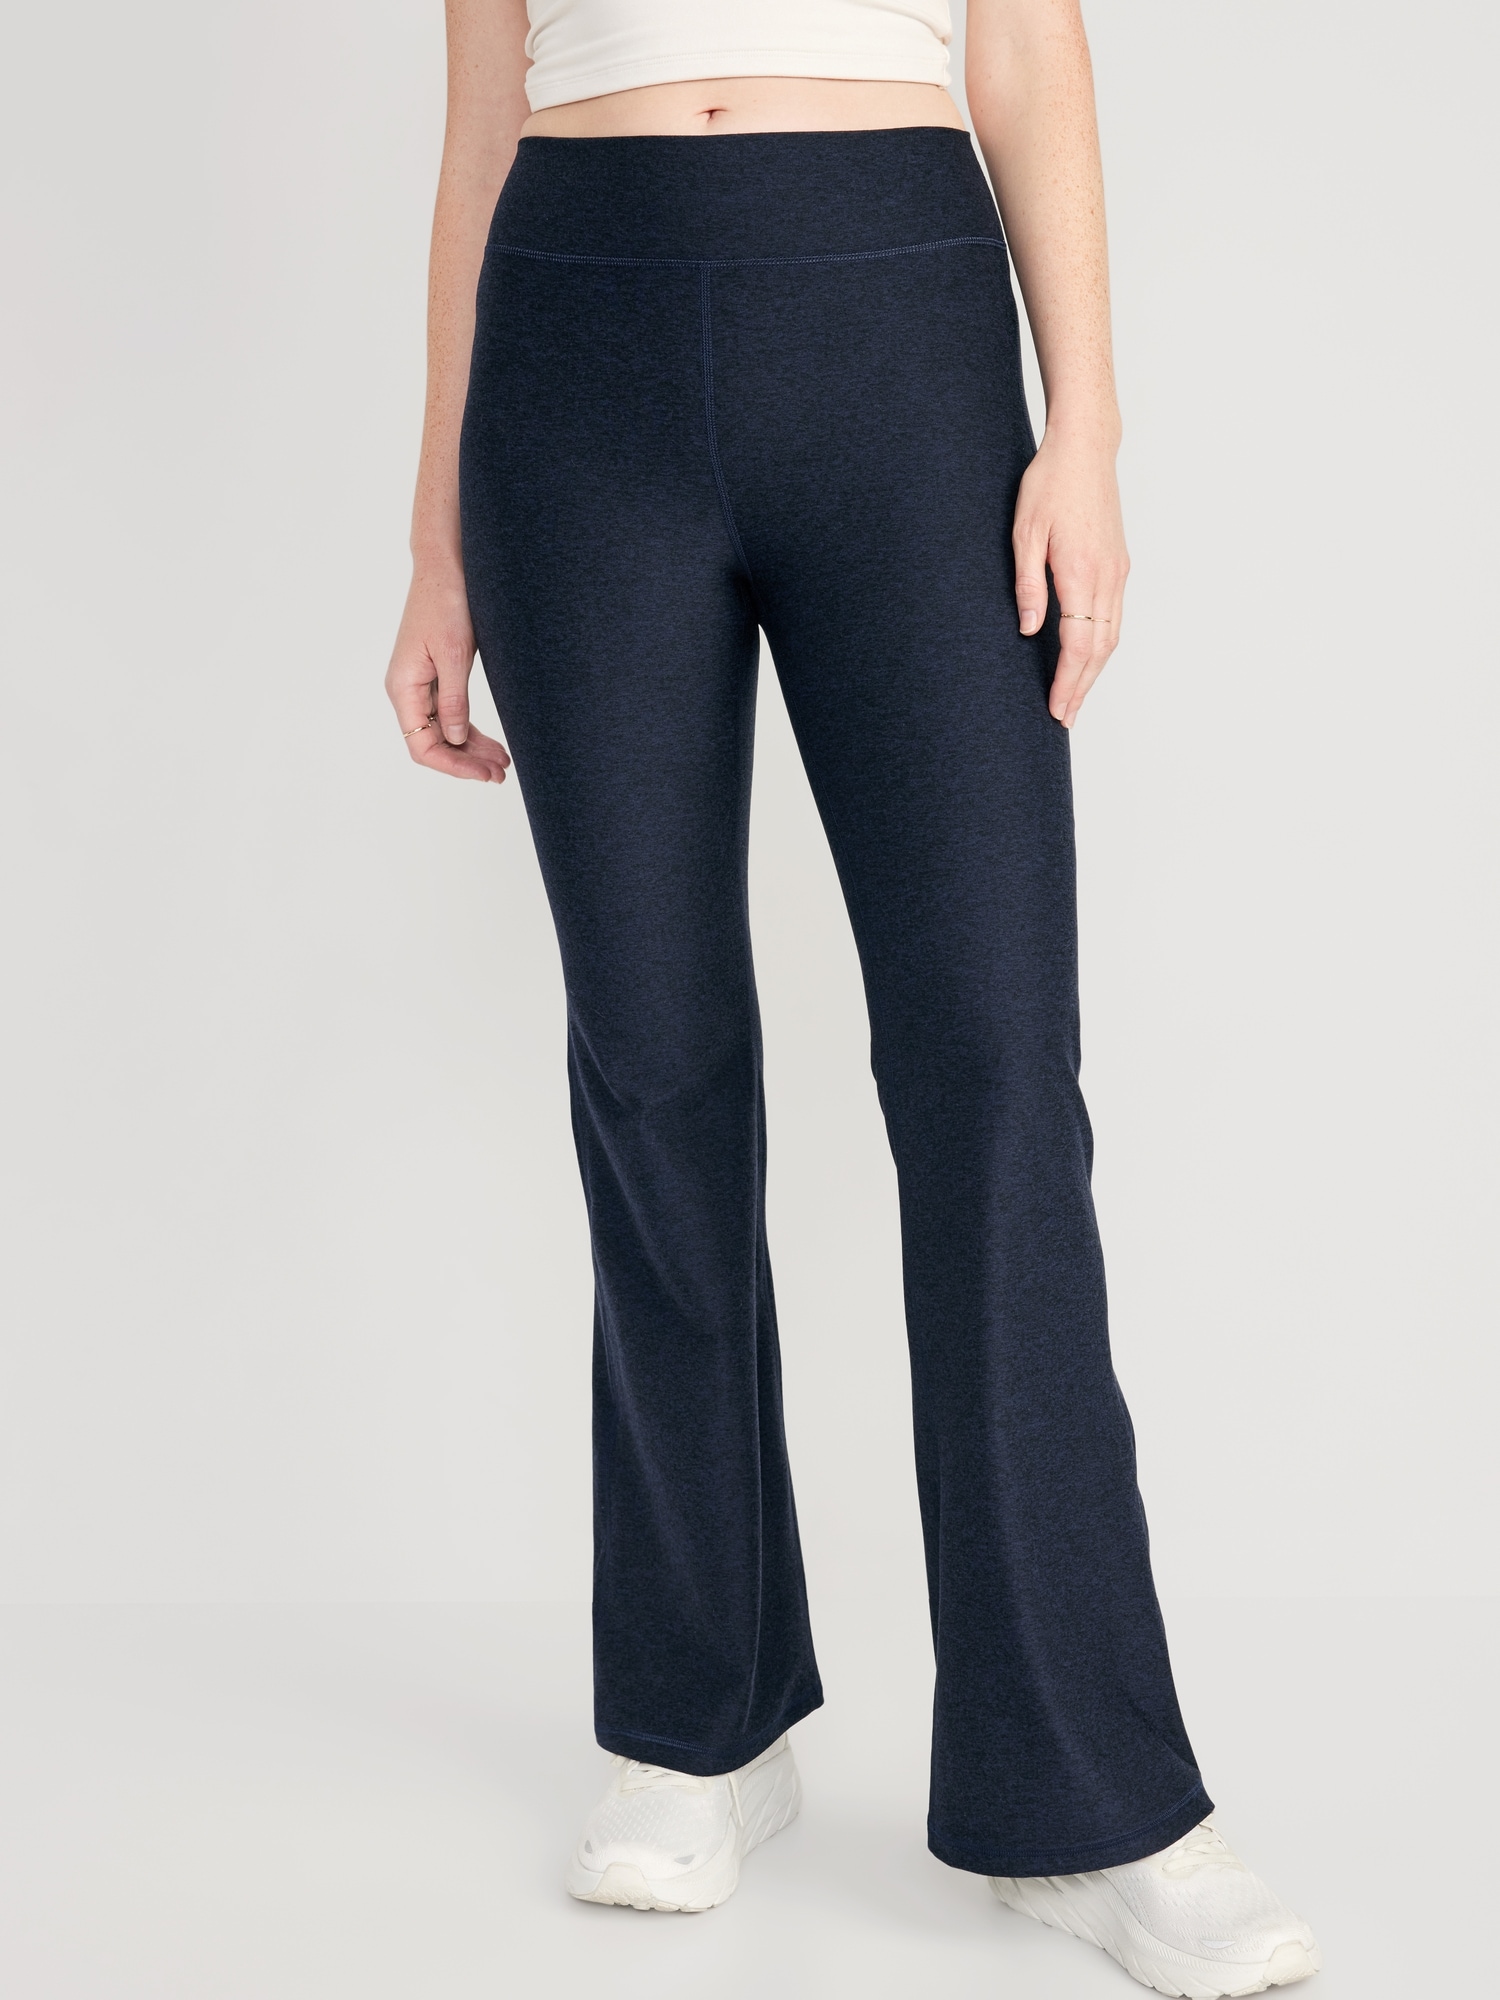 High-Waisted Cloud+ Flare Leggings for Women, Old Navy